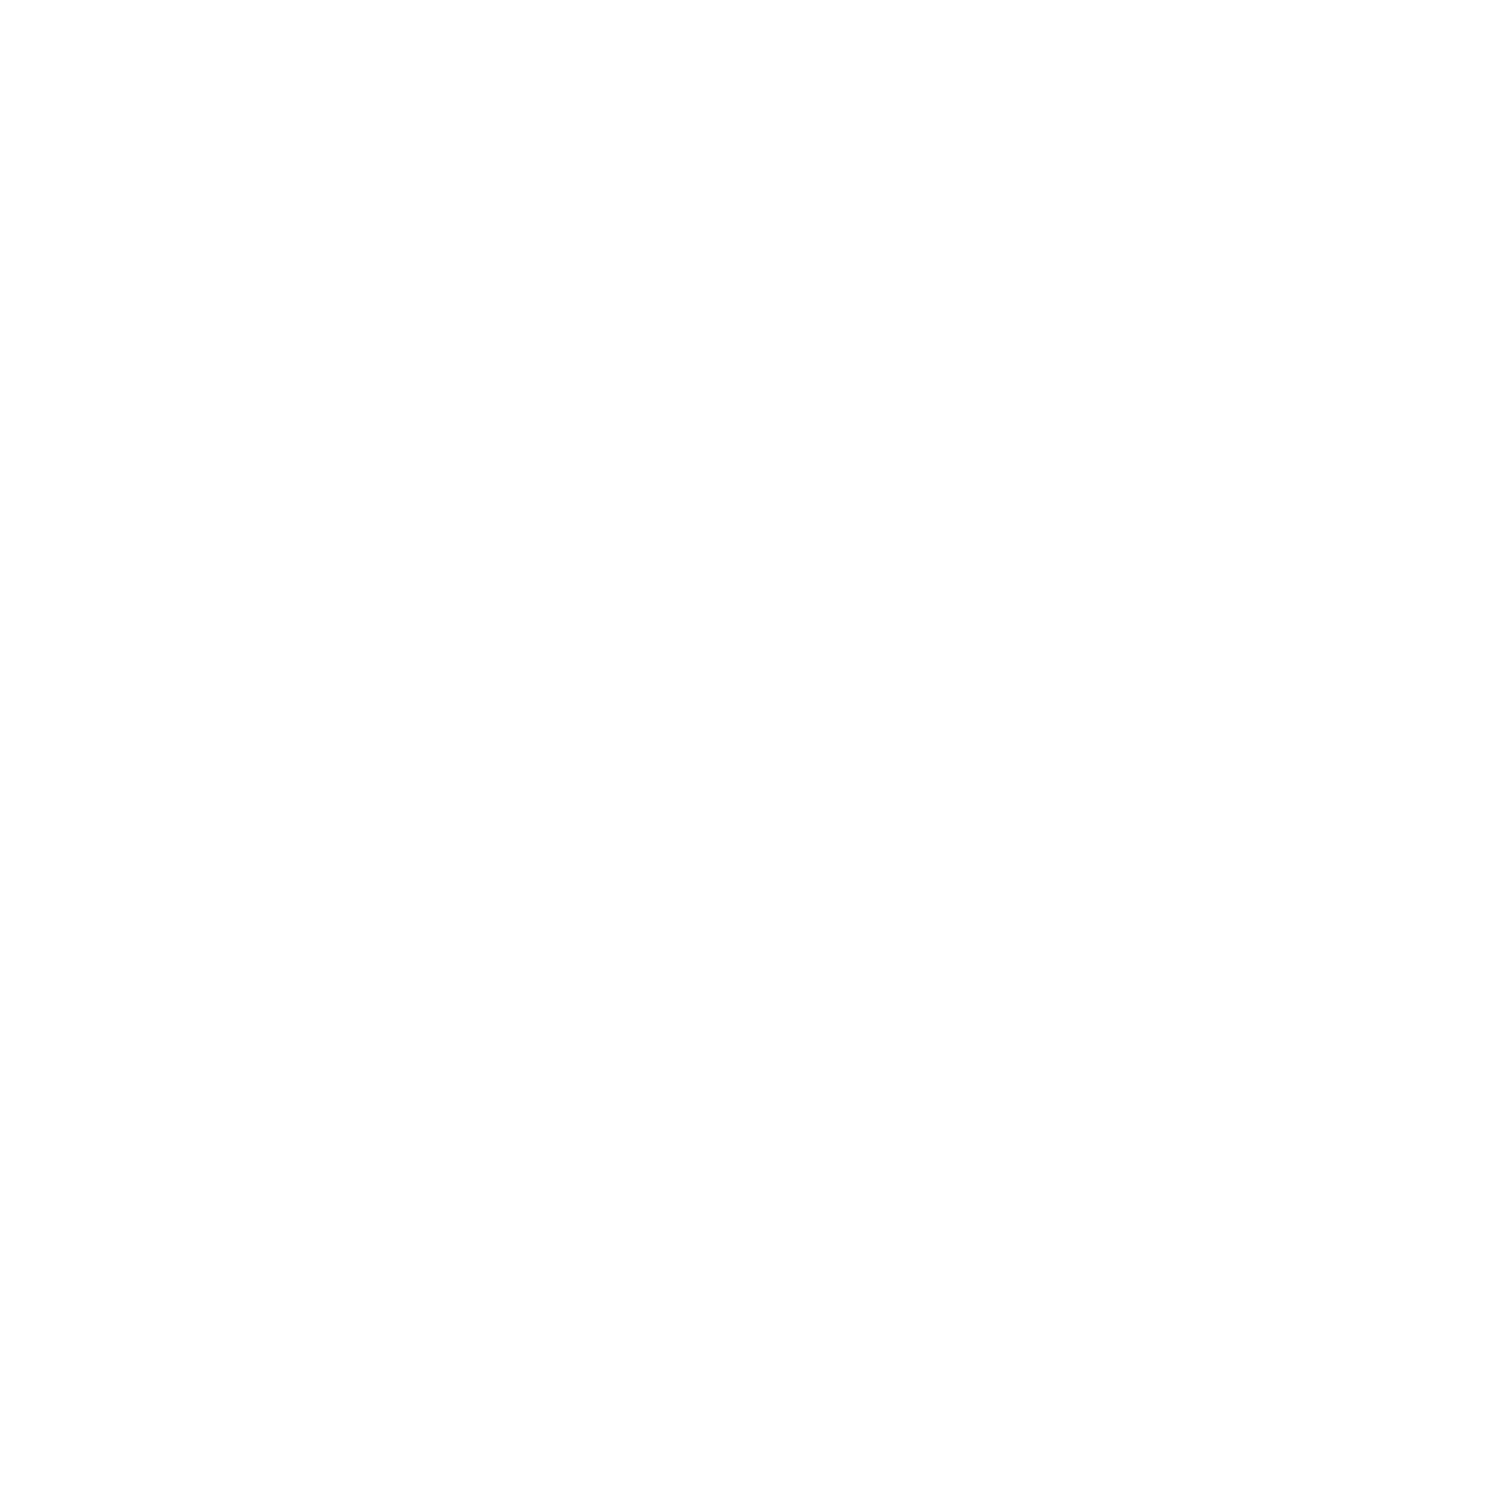 Sprouted Roots